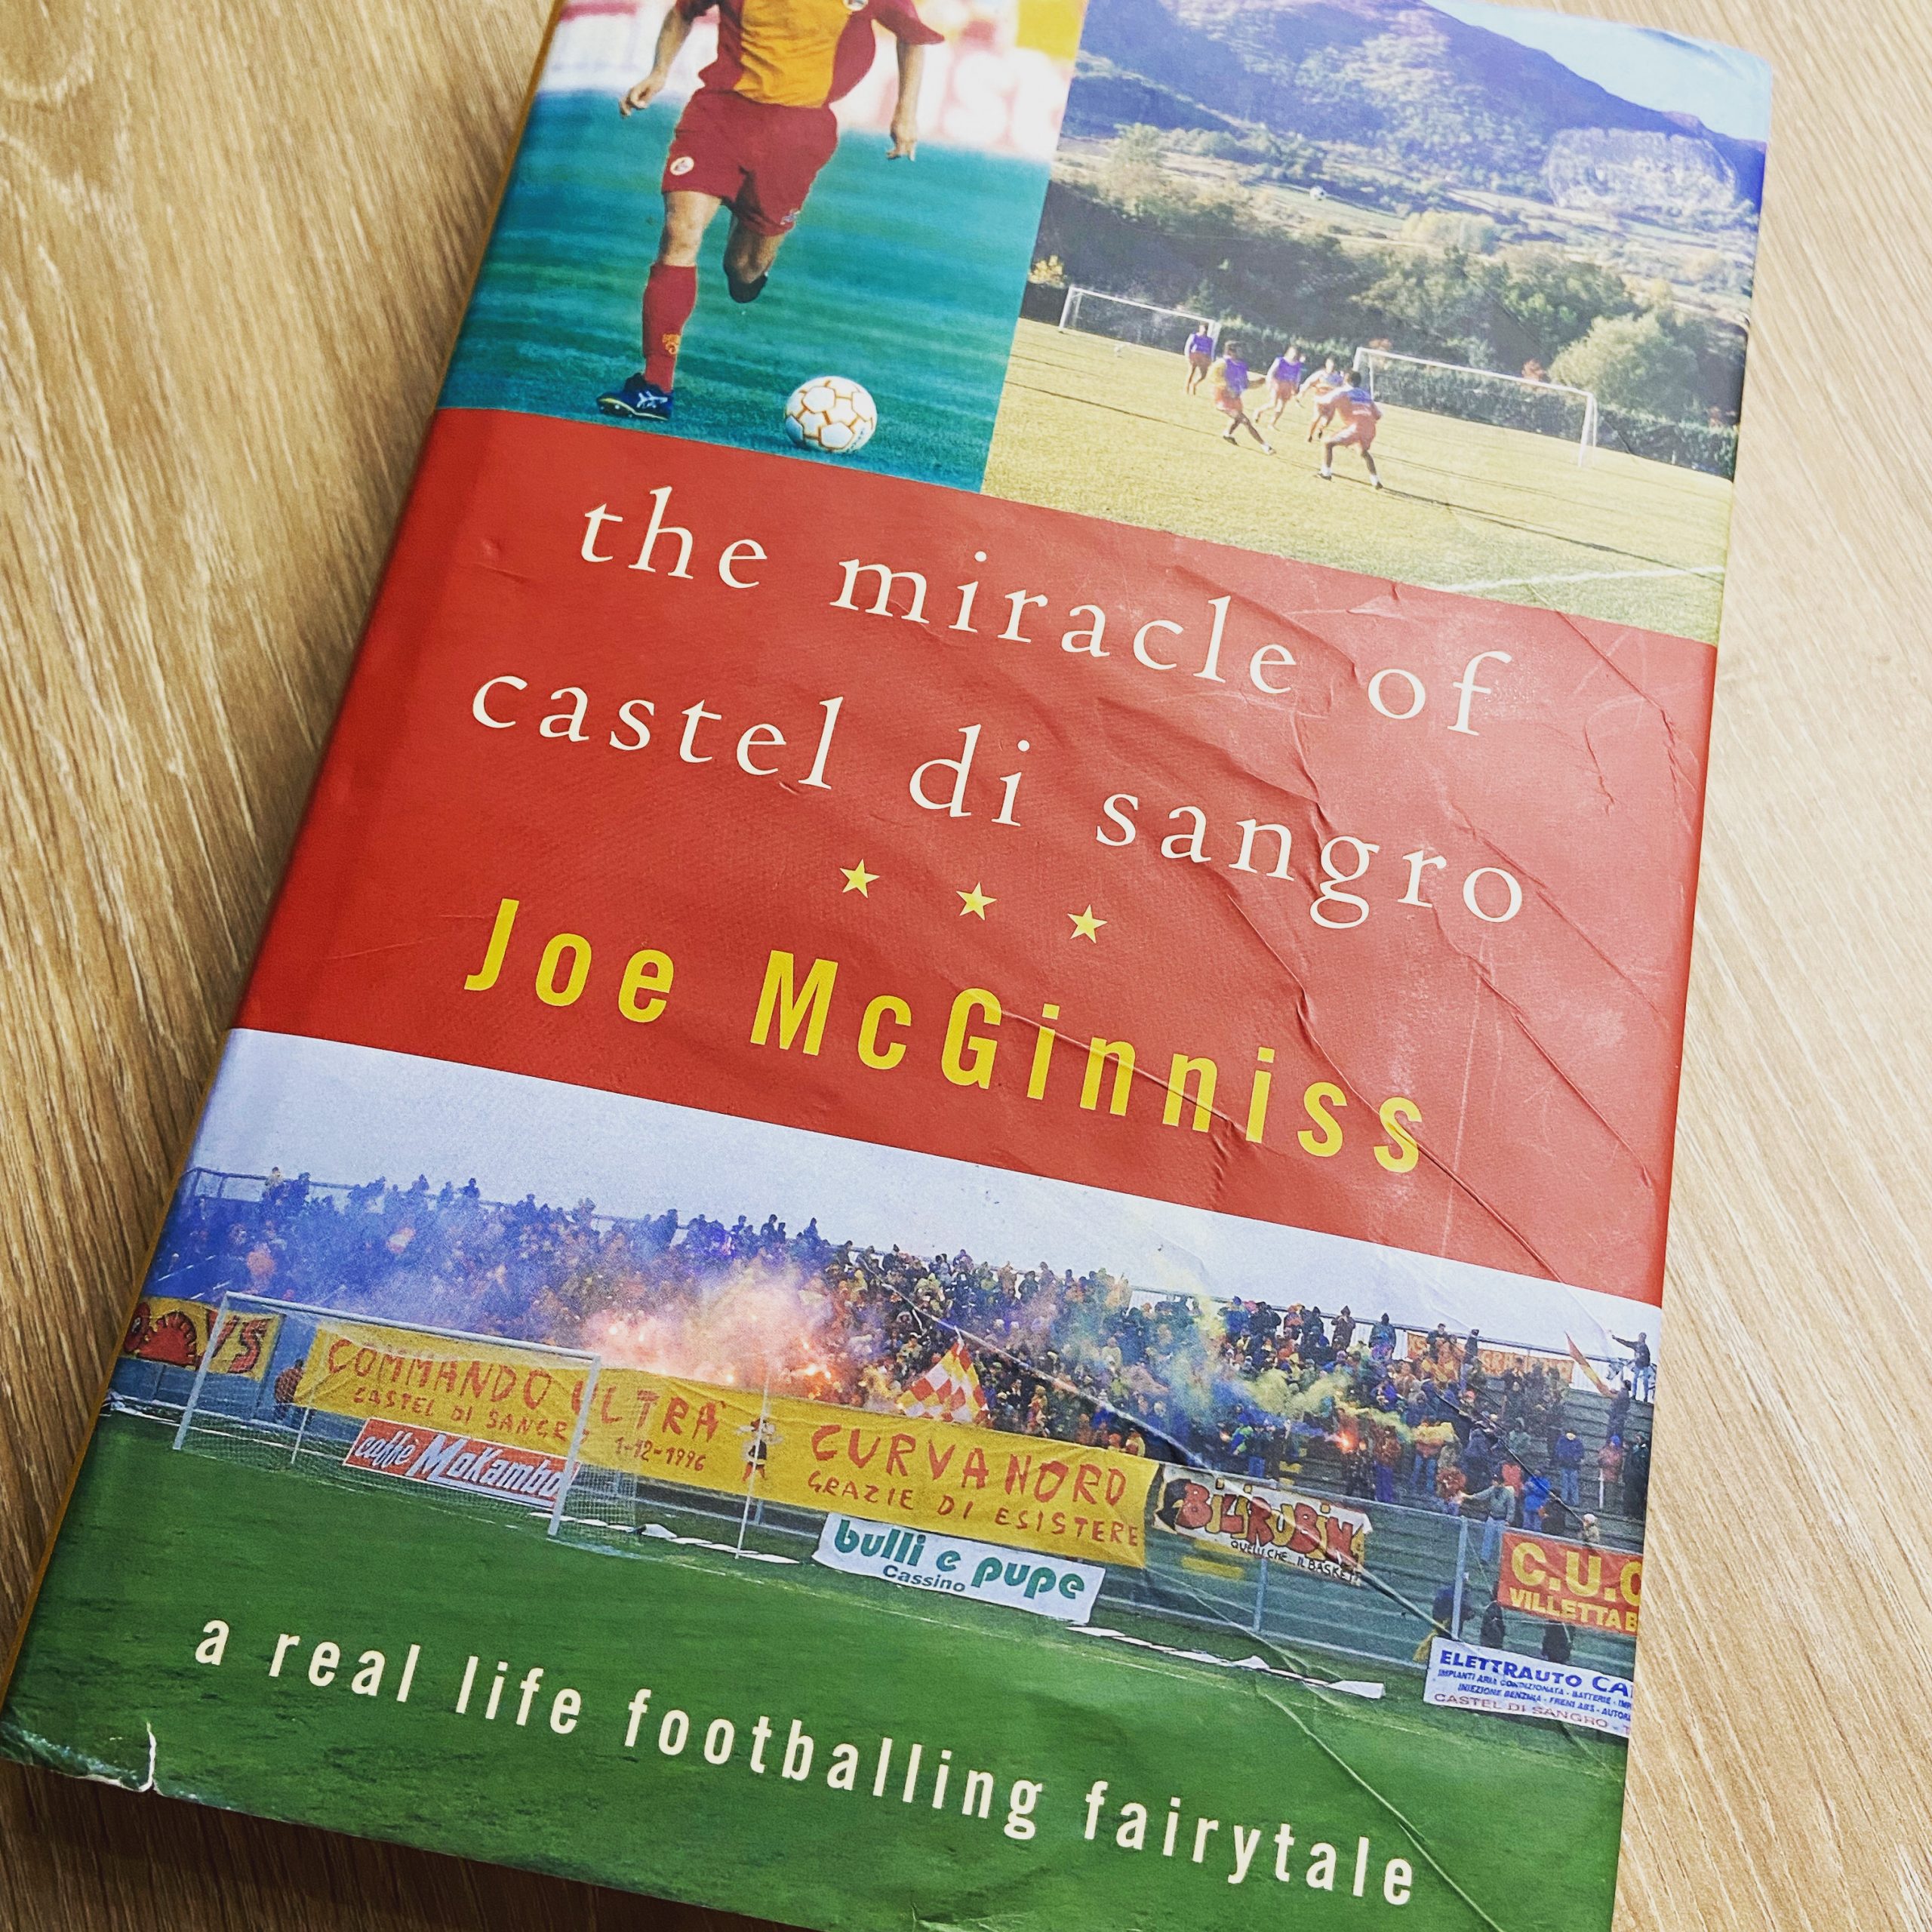 The Miracle Of Castel Di Sangro by Joe McGinniss